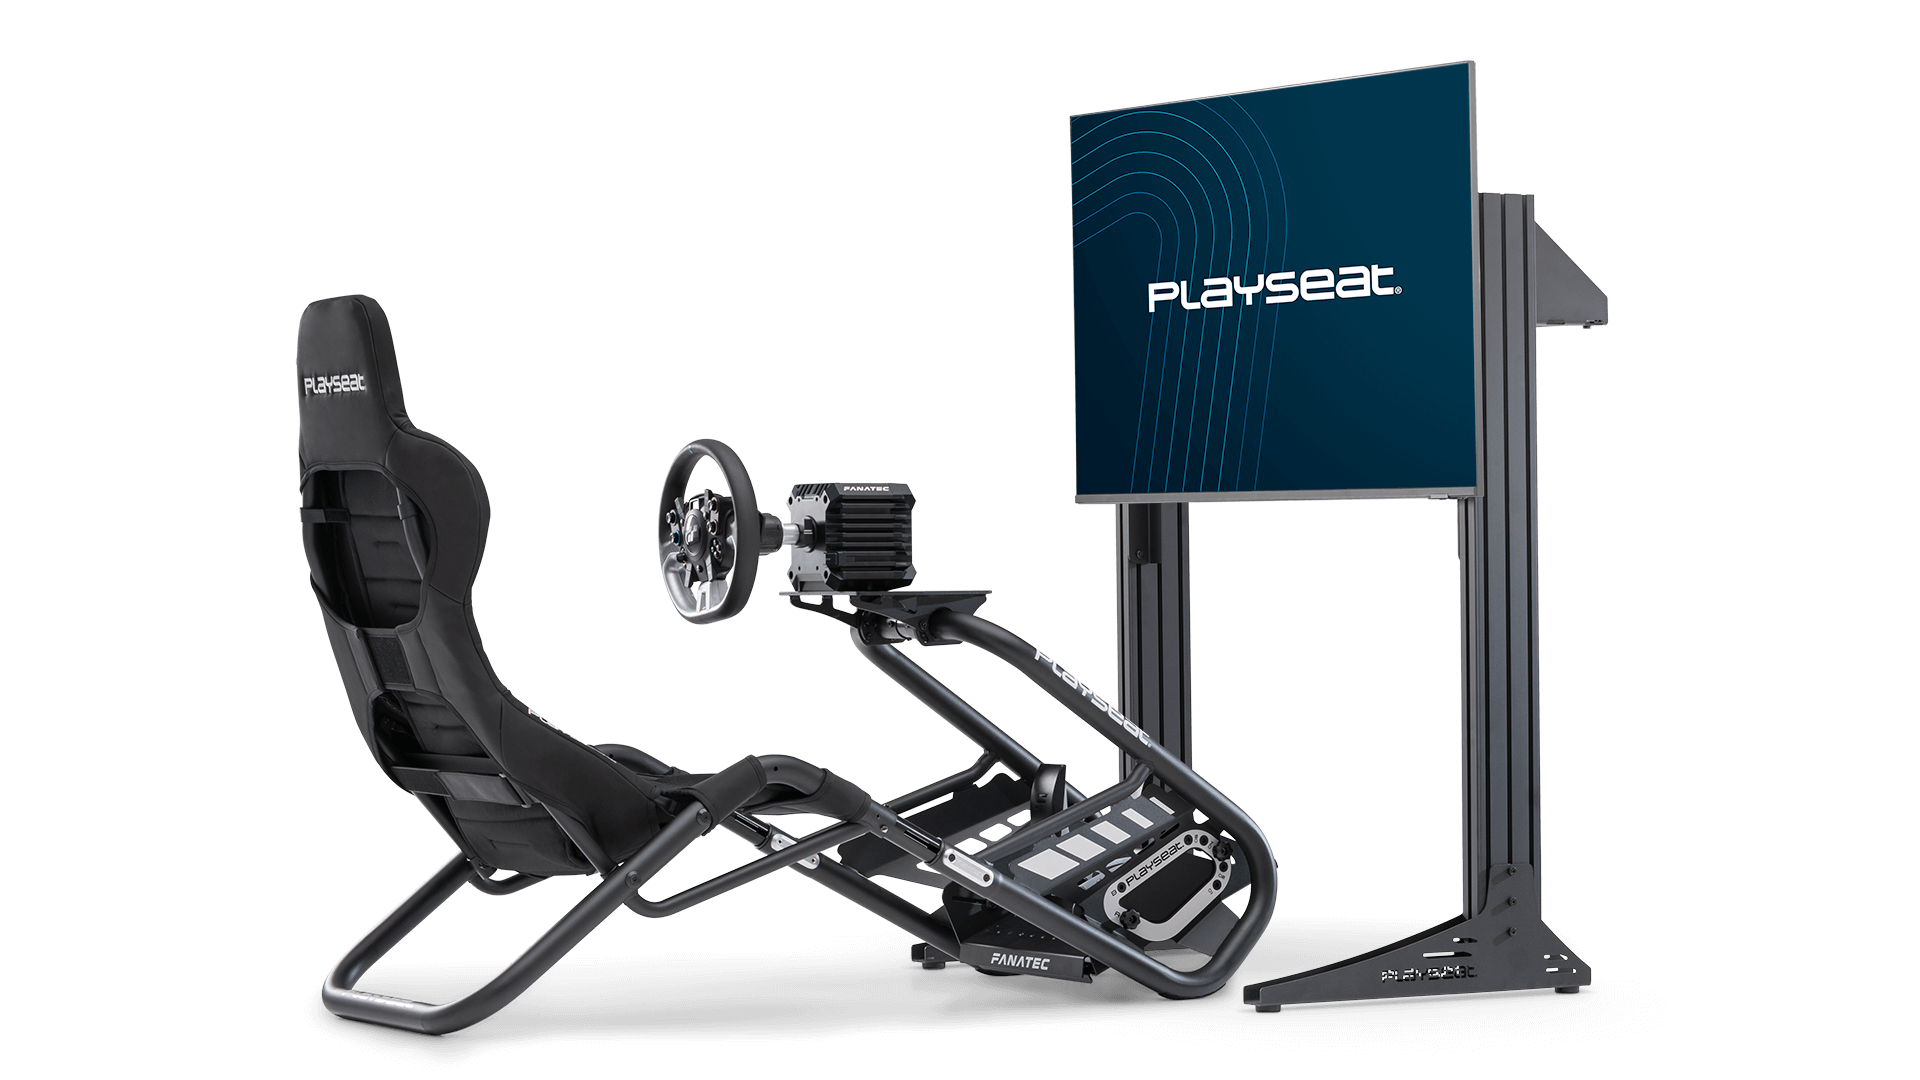 playseat-tv-stand-xl-single-with-playseat-trophy-black-fanatec-csl-dd-gran-turismo-1920x1080.png